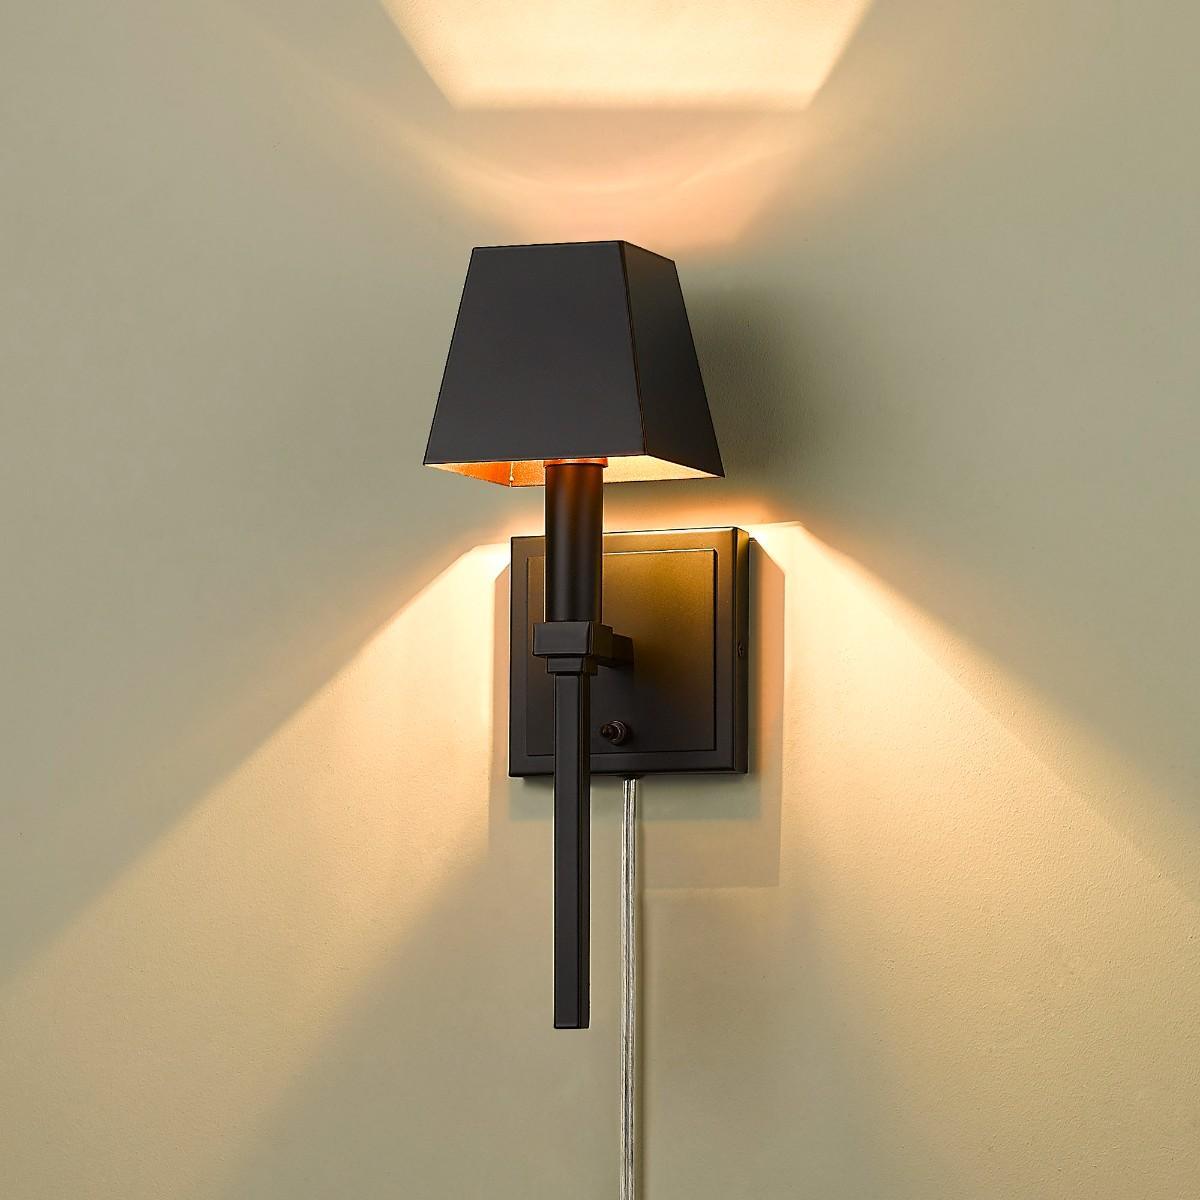 Messina 15 in Armed Sconce Black finish